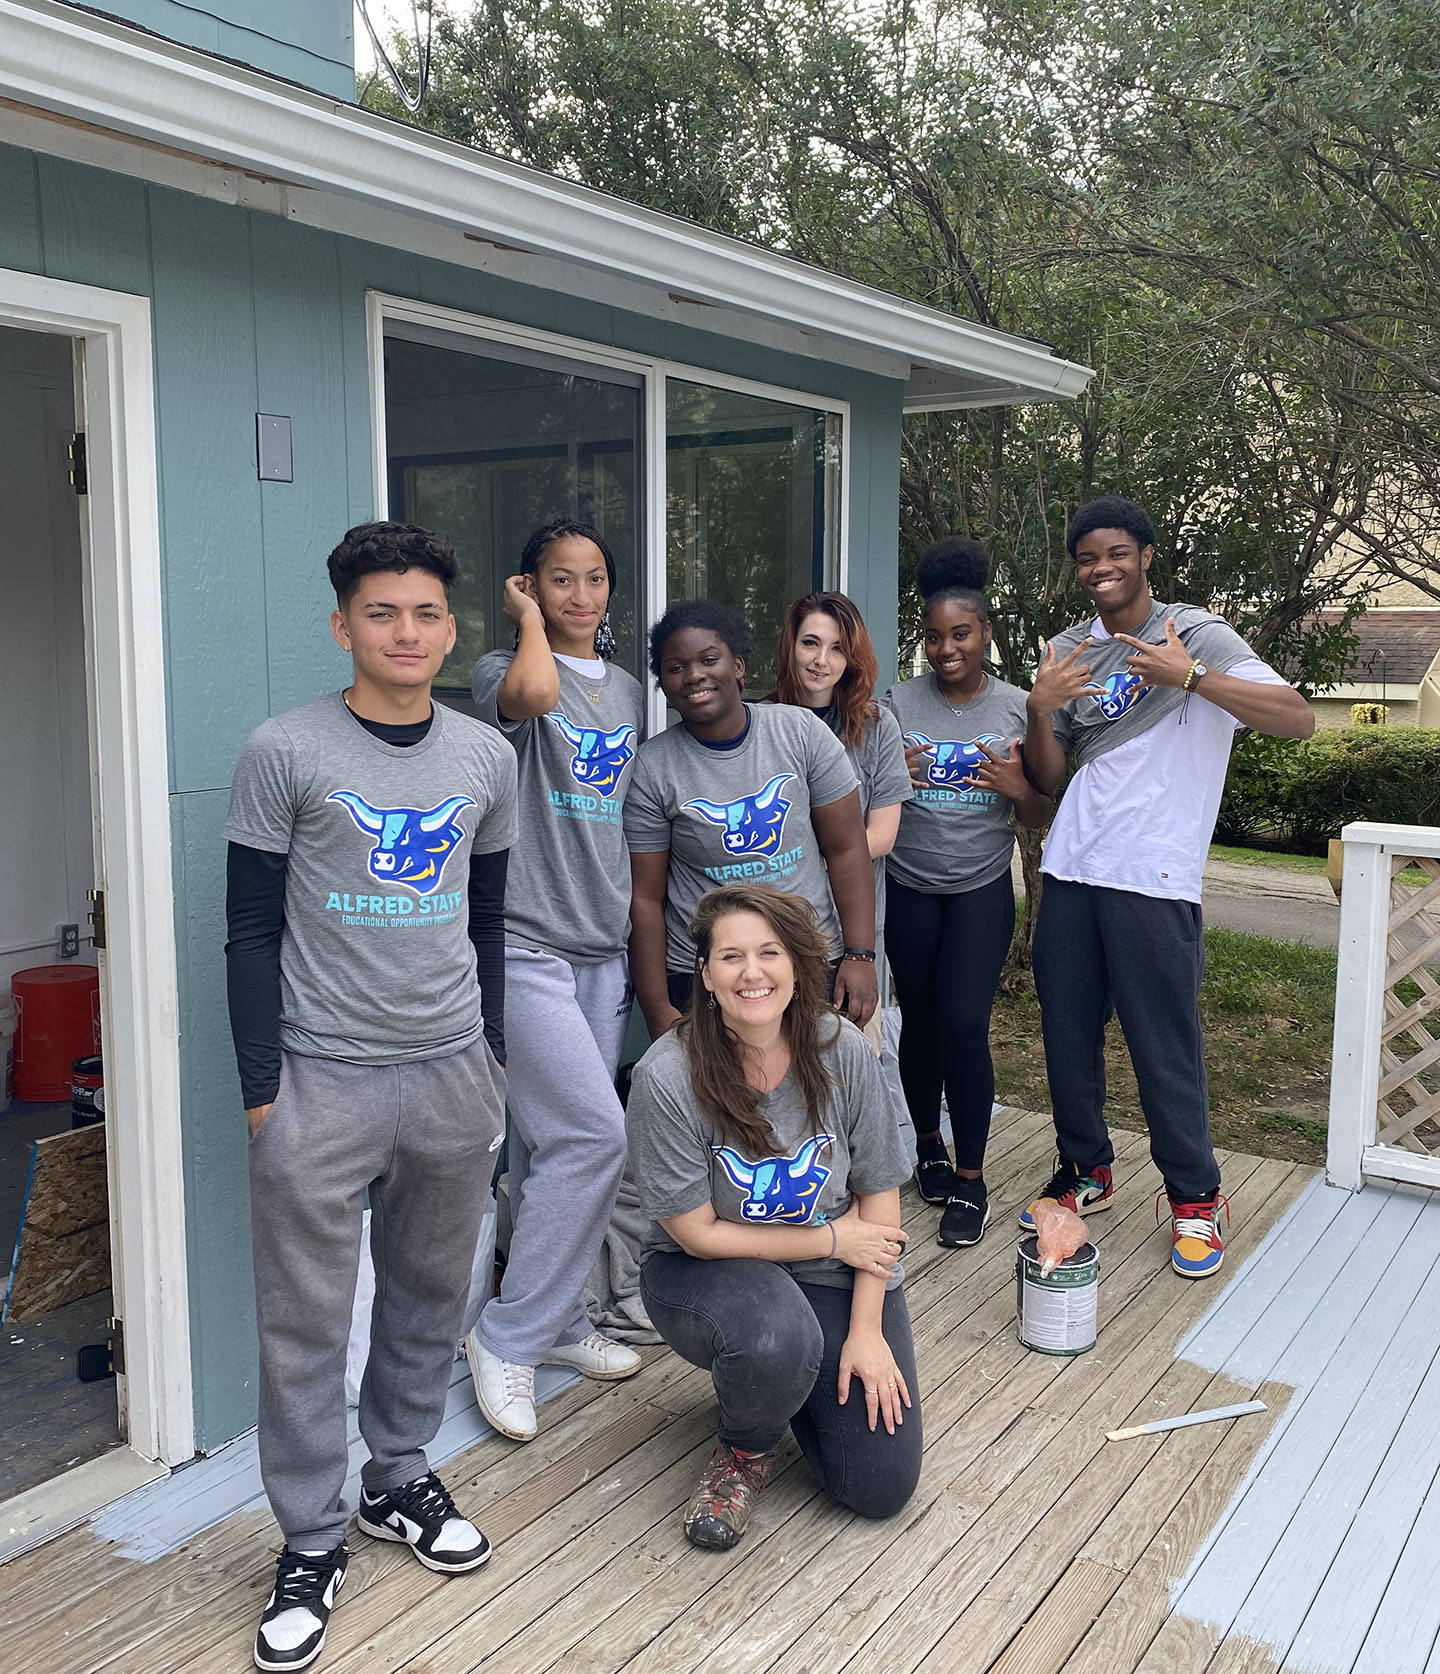 Alfred State College (ASC) students in the Educational Opportunity Program (EOP) worked with the Corning Habitat for Humanity office on a civic engagement project. Thirty-one students participated in the project.